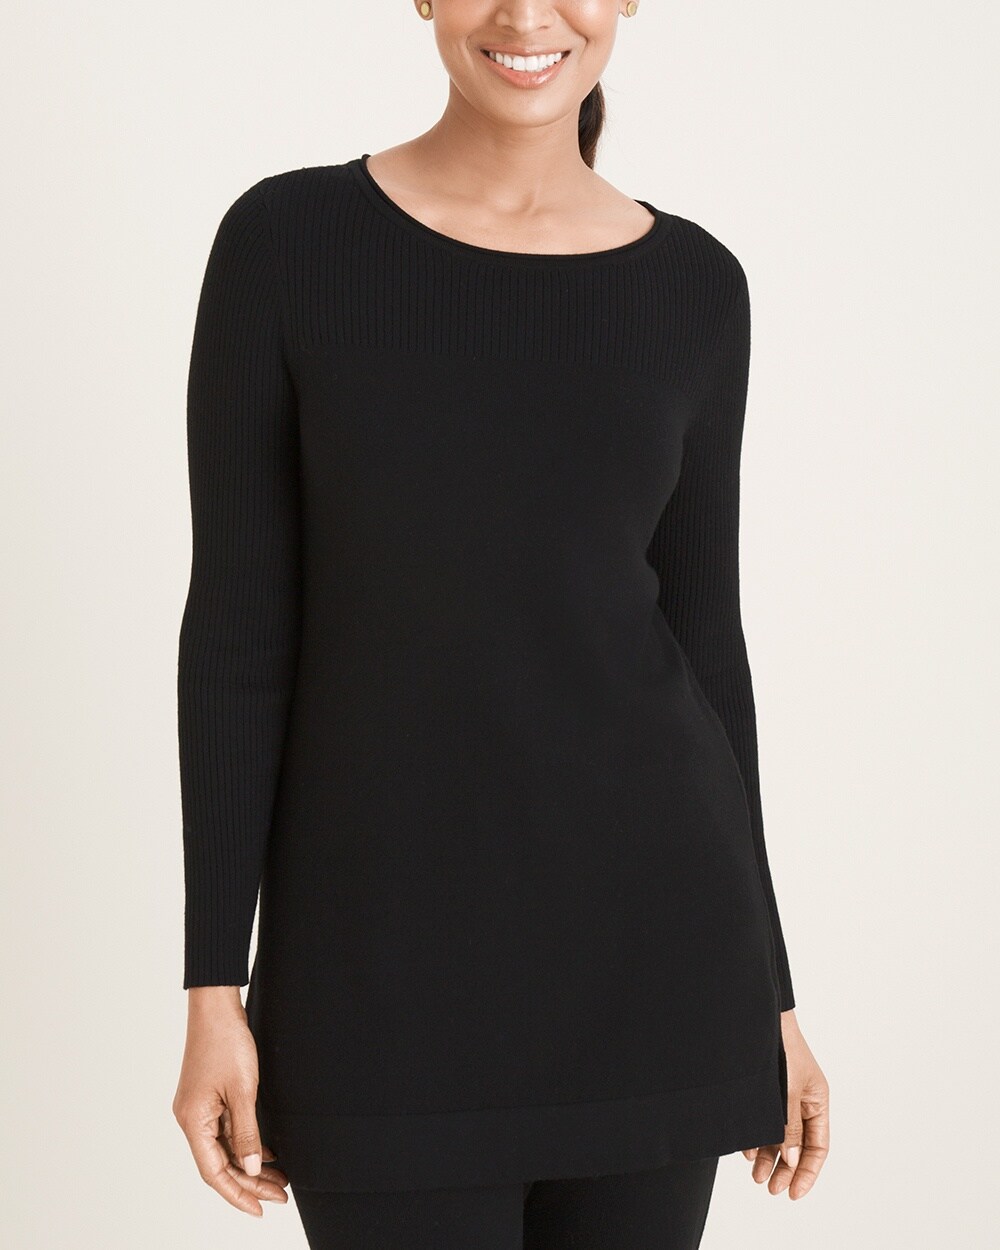 Zenergy Cotton-Cashmere Blend Ribbed Pullover Tunic